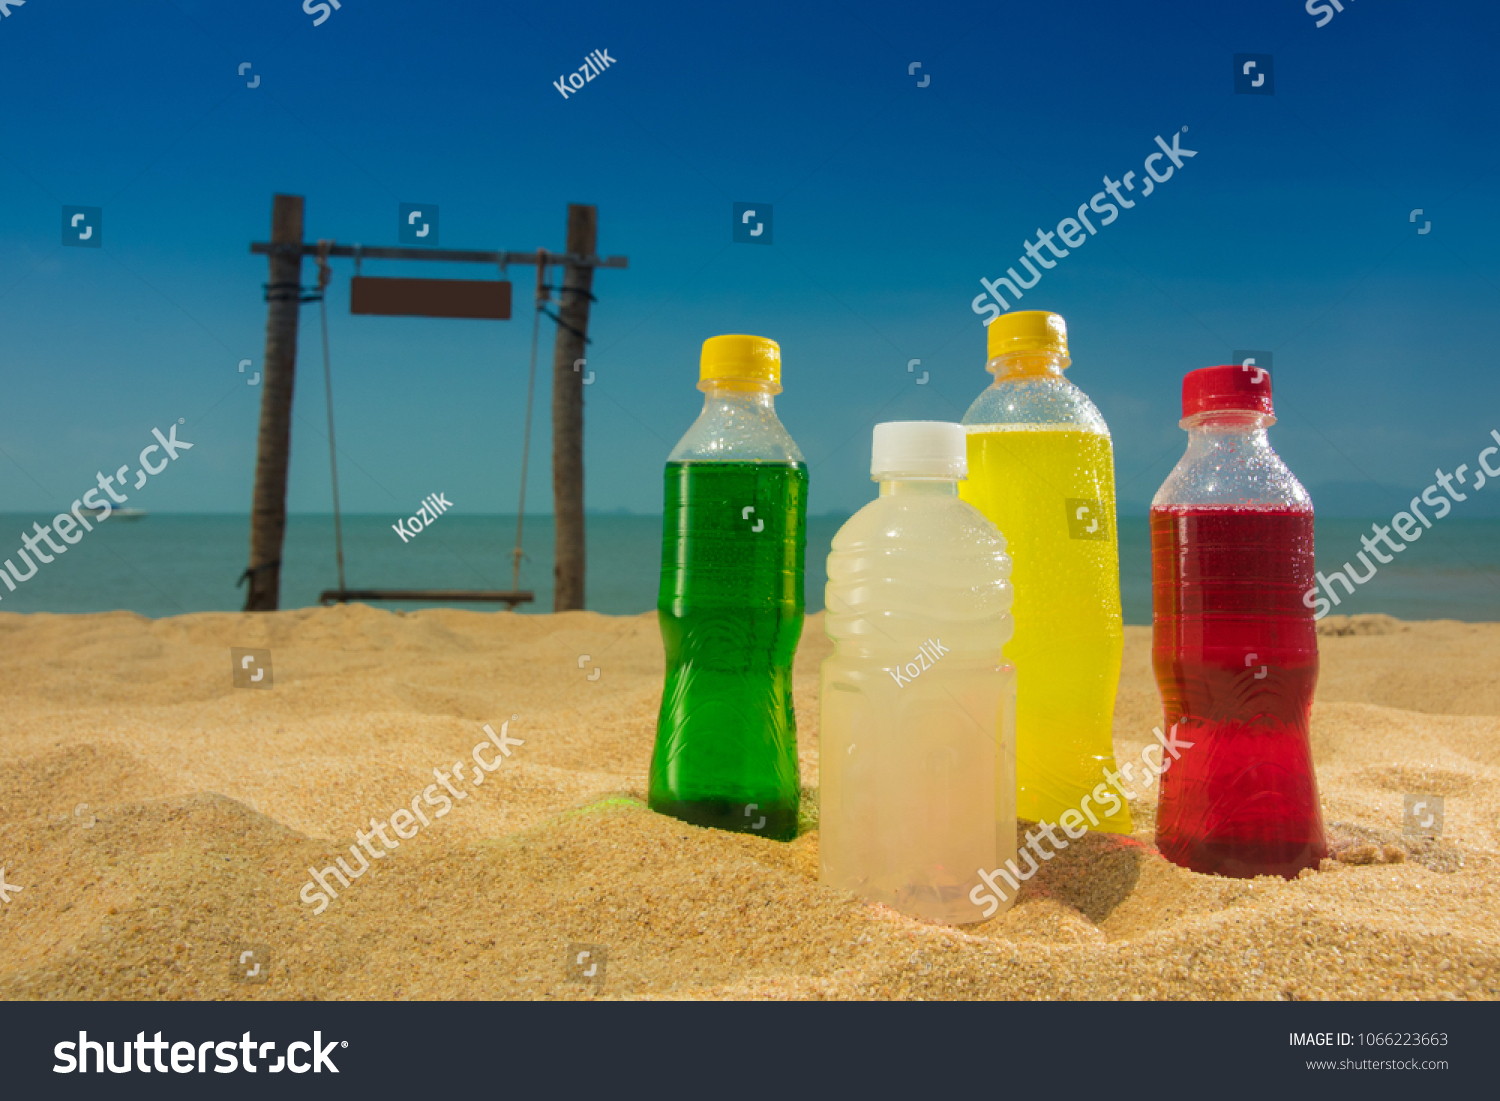 Download Bottles Multicolored Drinks Yellow Red Green Food And Drink Stock Image 1066223663 PSD Mockup Templates